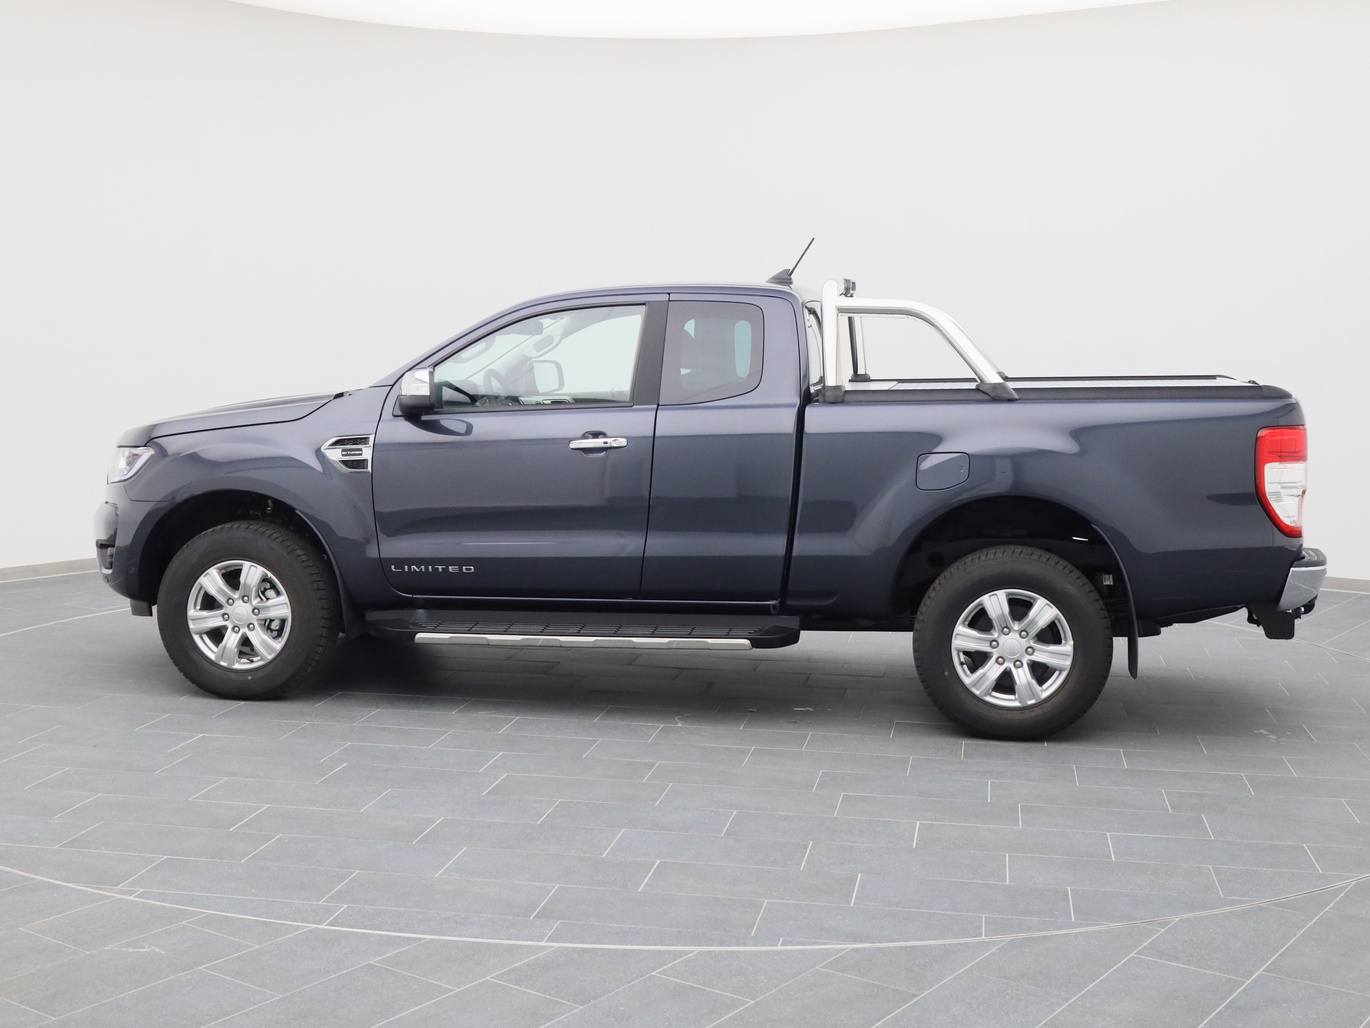  Ford Ranger Extrakab. Limited 213PS Aut. / Rollo in Royal Grau von Links